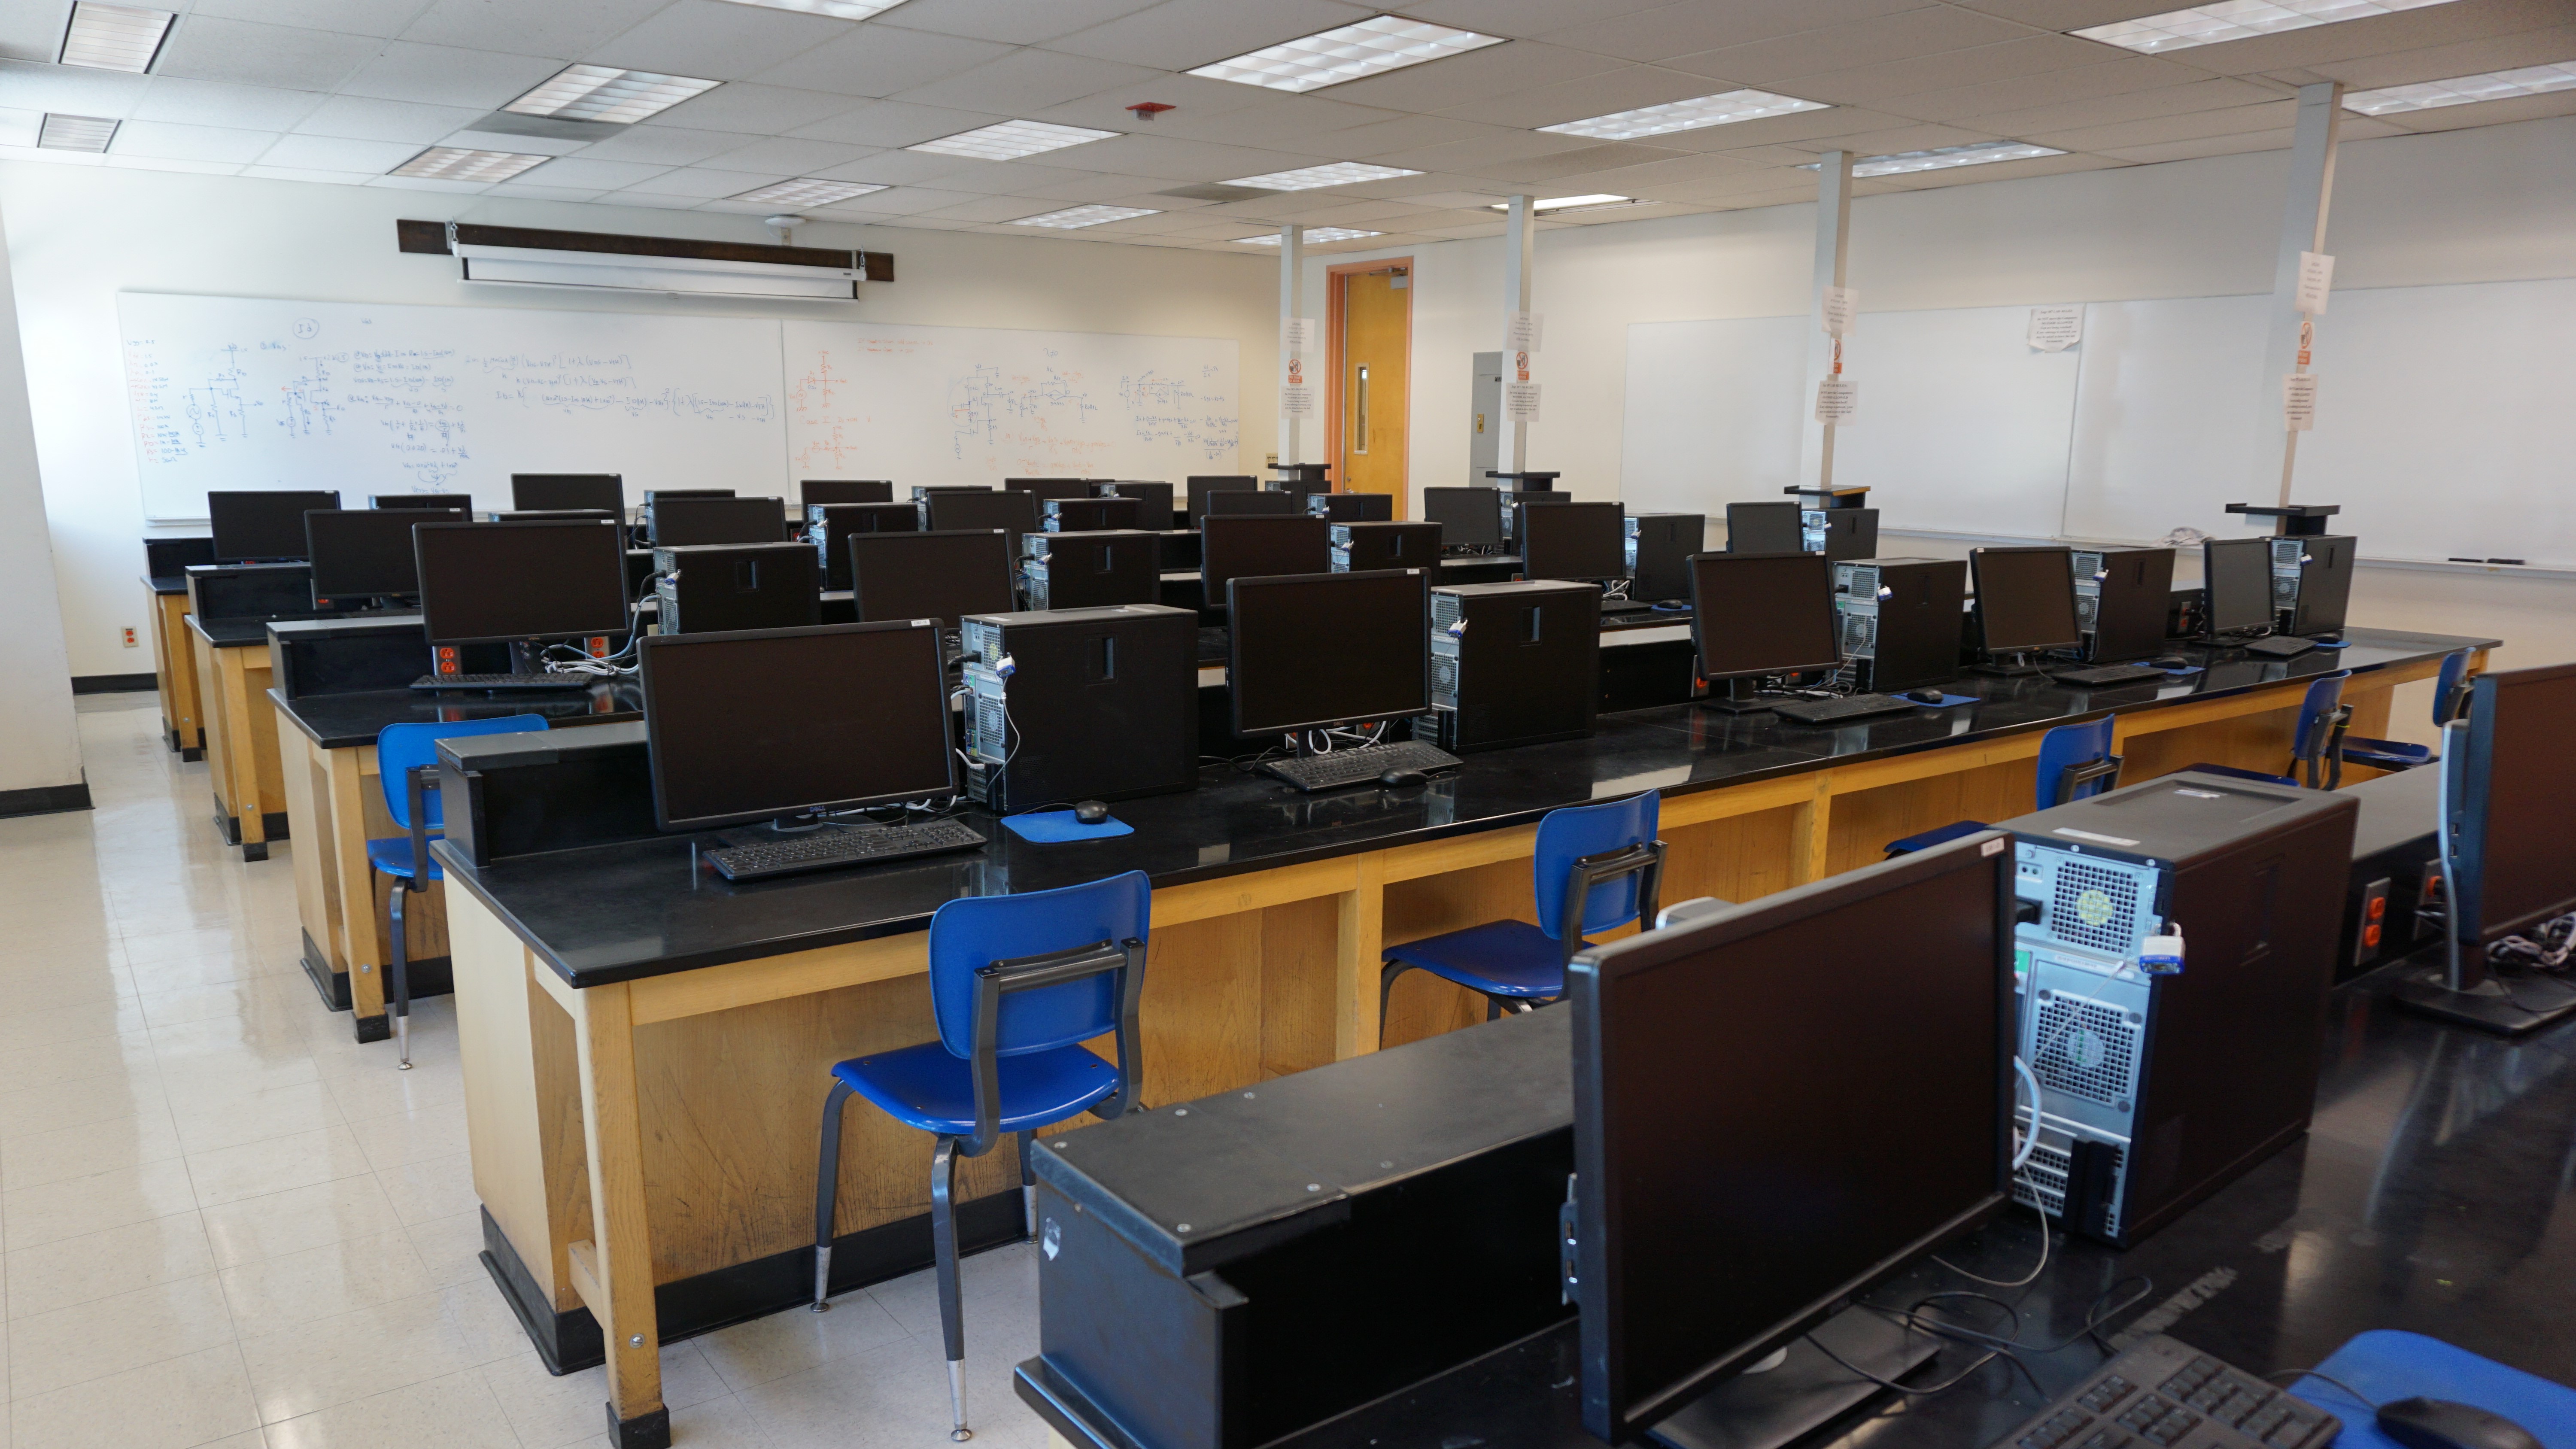 Black computer stations filling up a classsroom. Blue chairs are set up in front of every monitor.